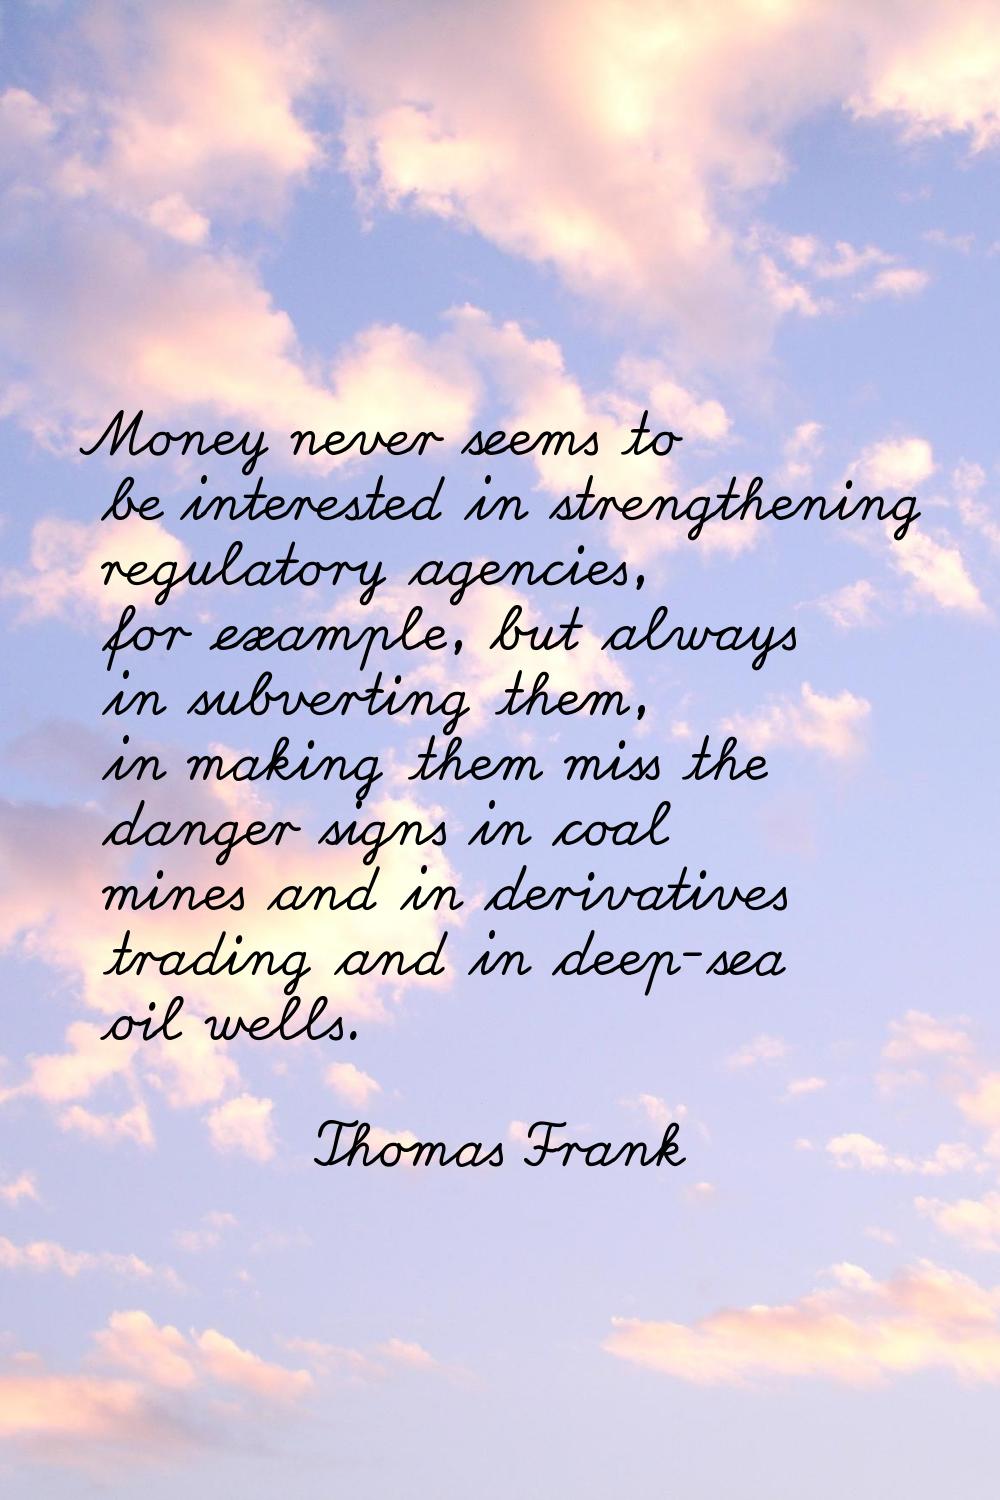 Money never seems to be interested in strengthening regulatory agencies, for example, but always in